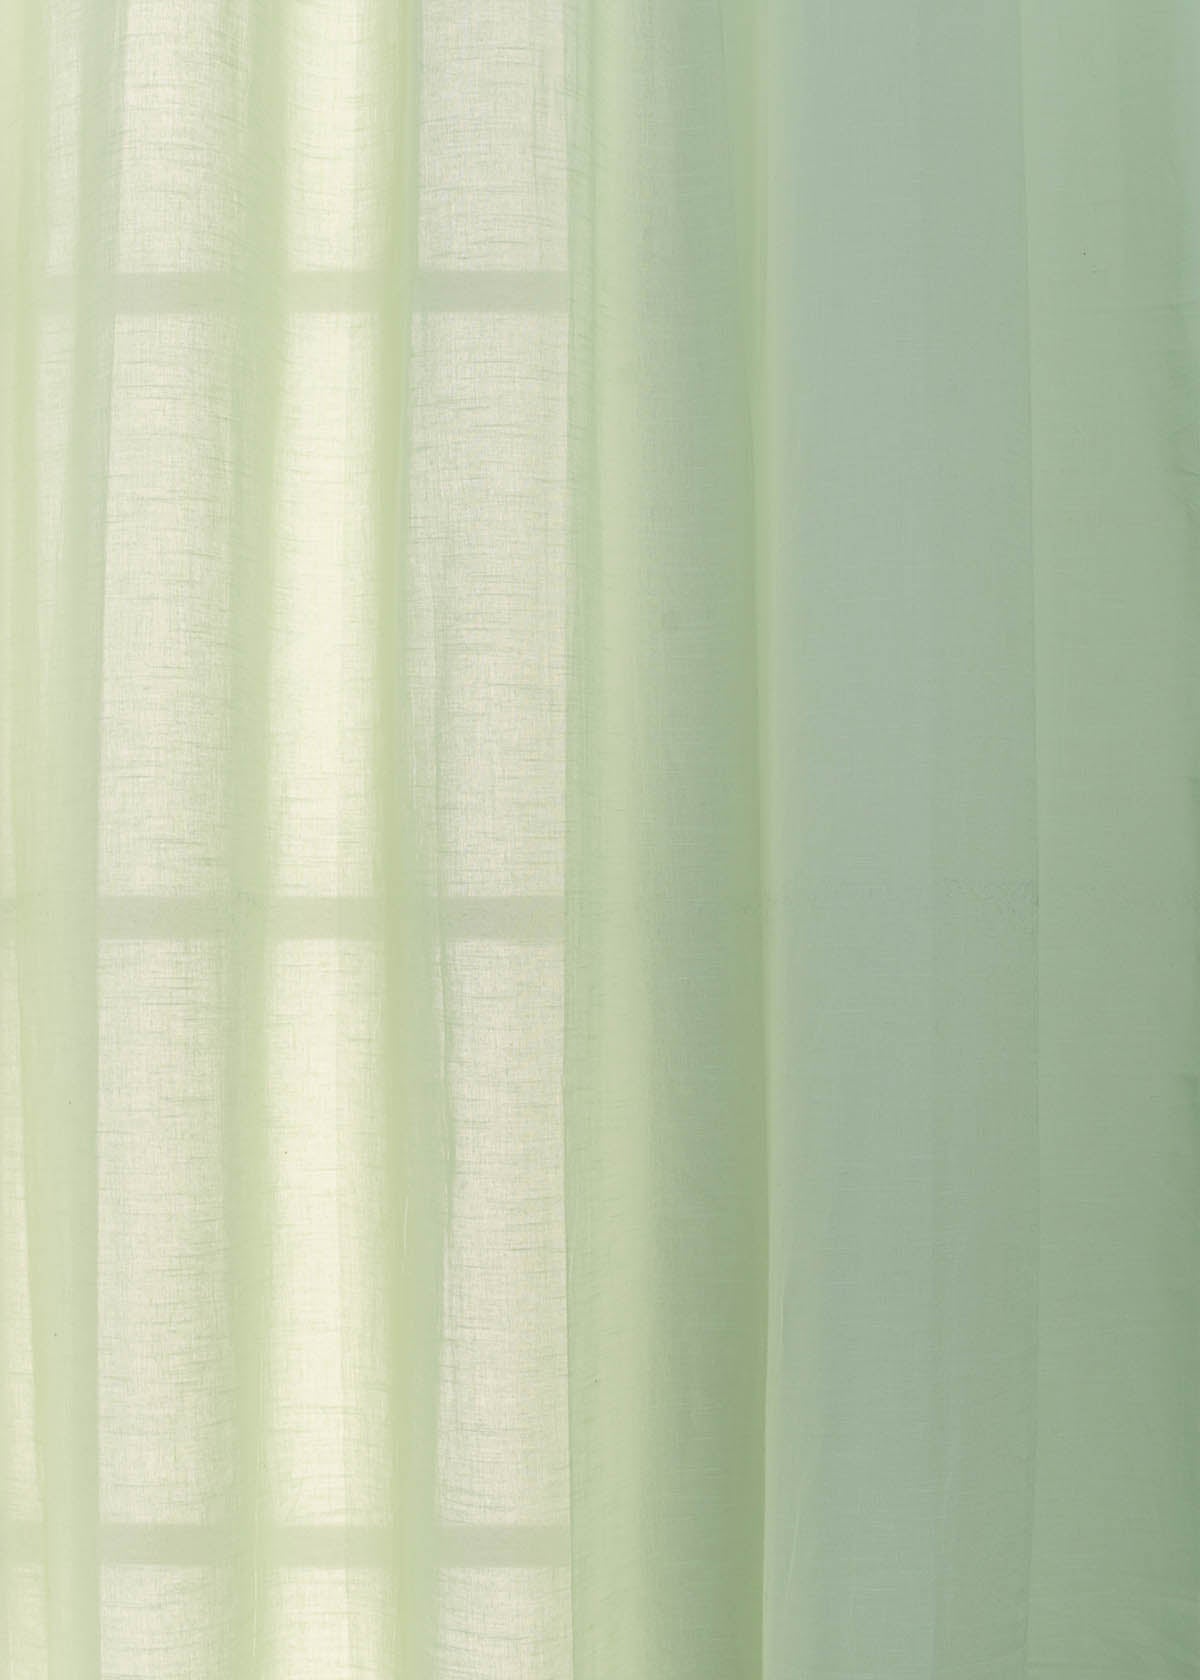 Solid Sage Green sheer 100% Customizable Cotton plain curtain for Living room & bedroom - Light filtering